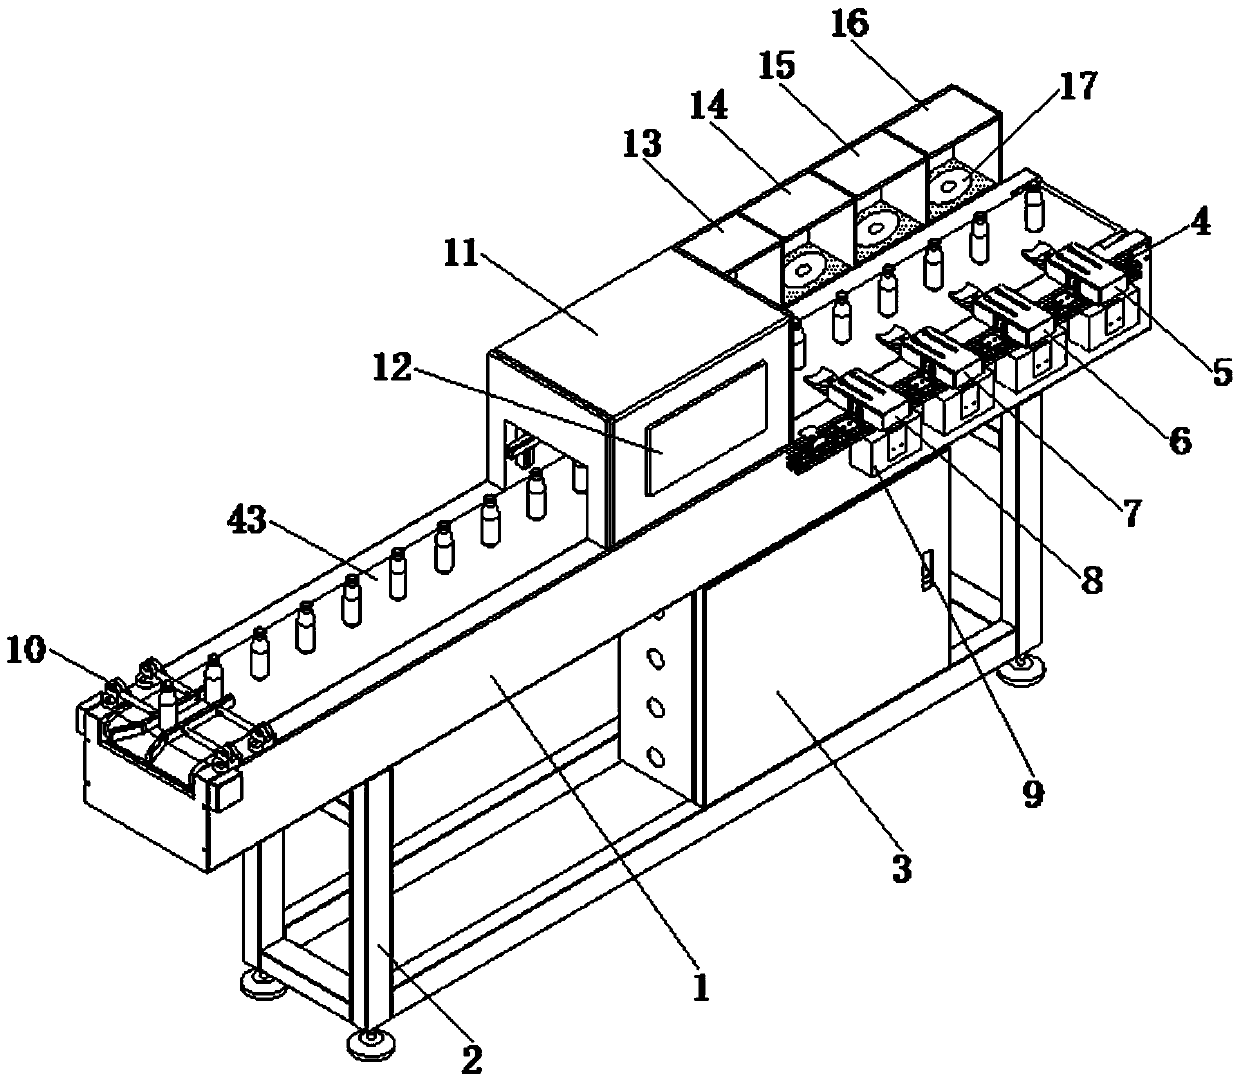 Bottled beverage detection and sorting device